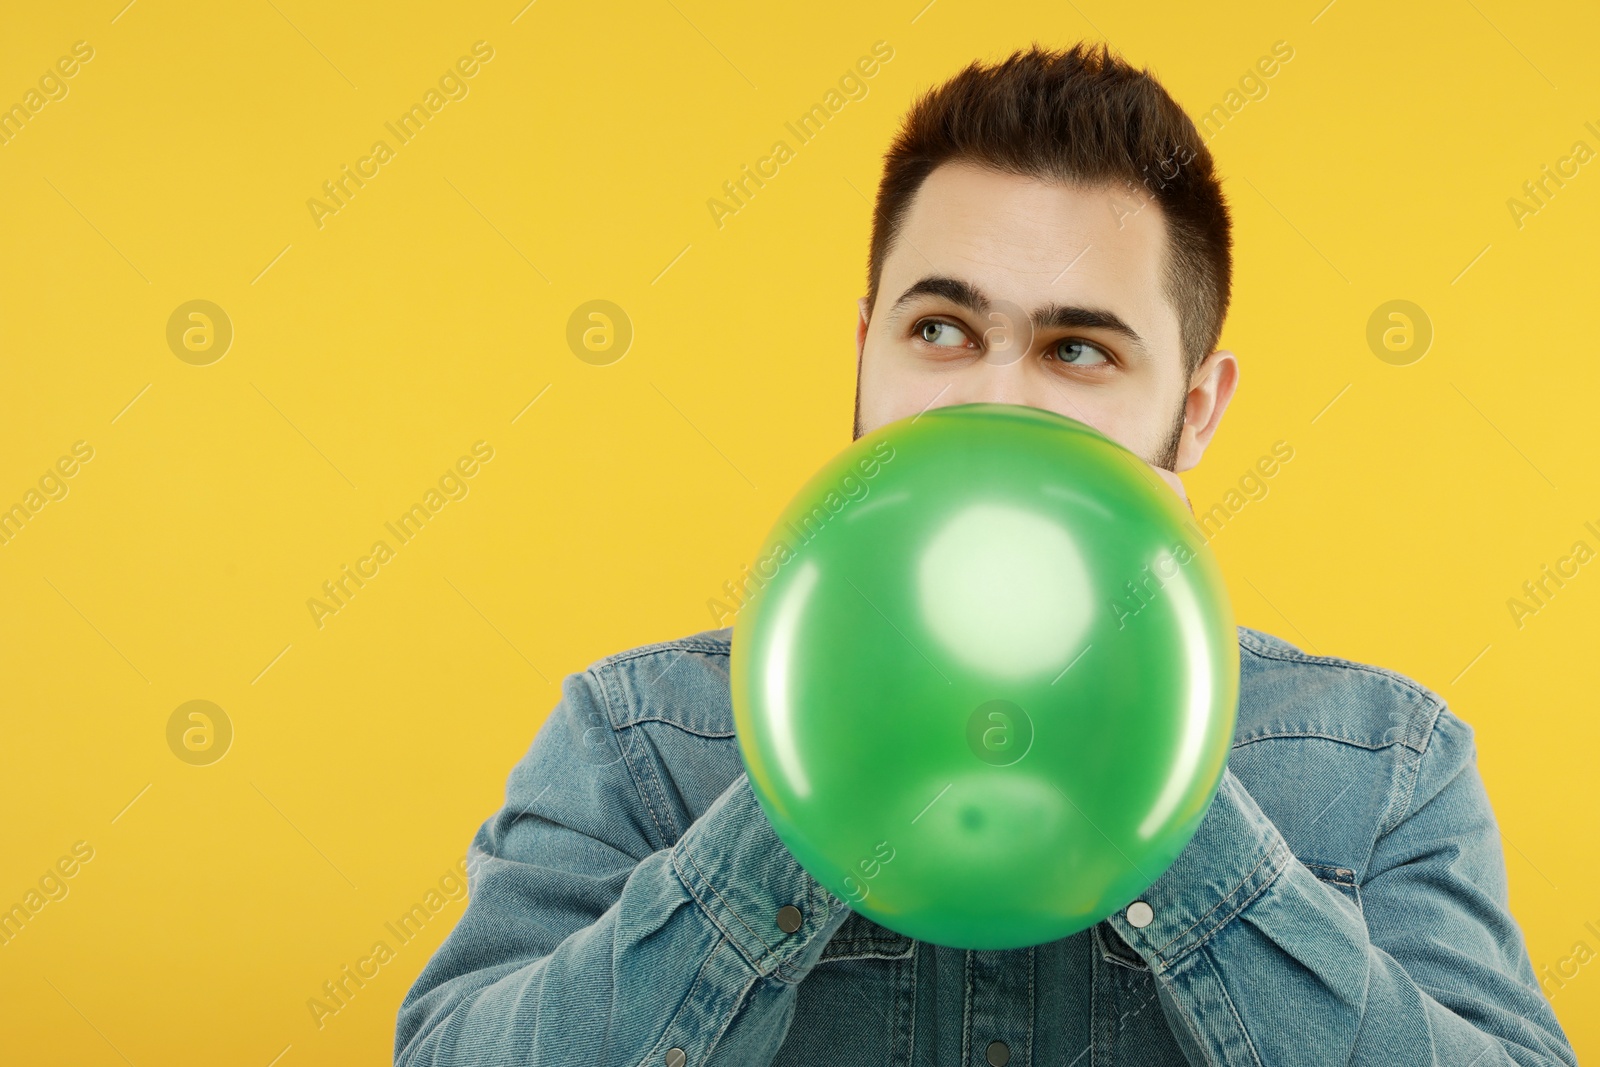 Photo of Man inflating bright balloon on yellow background, space for text